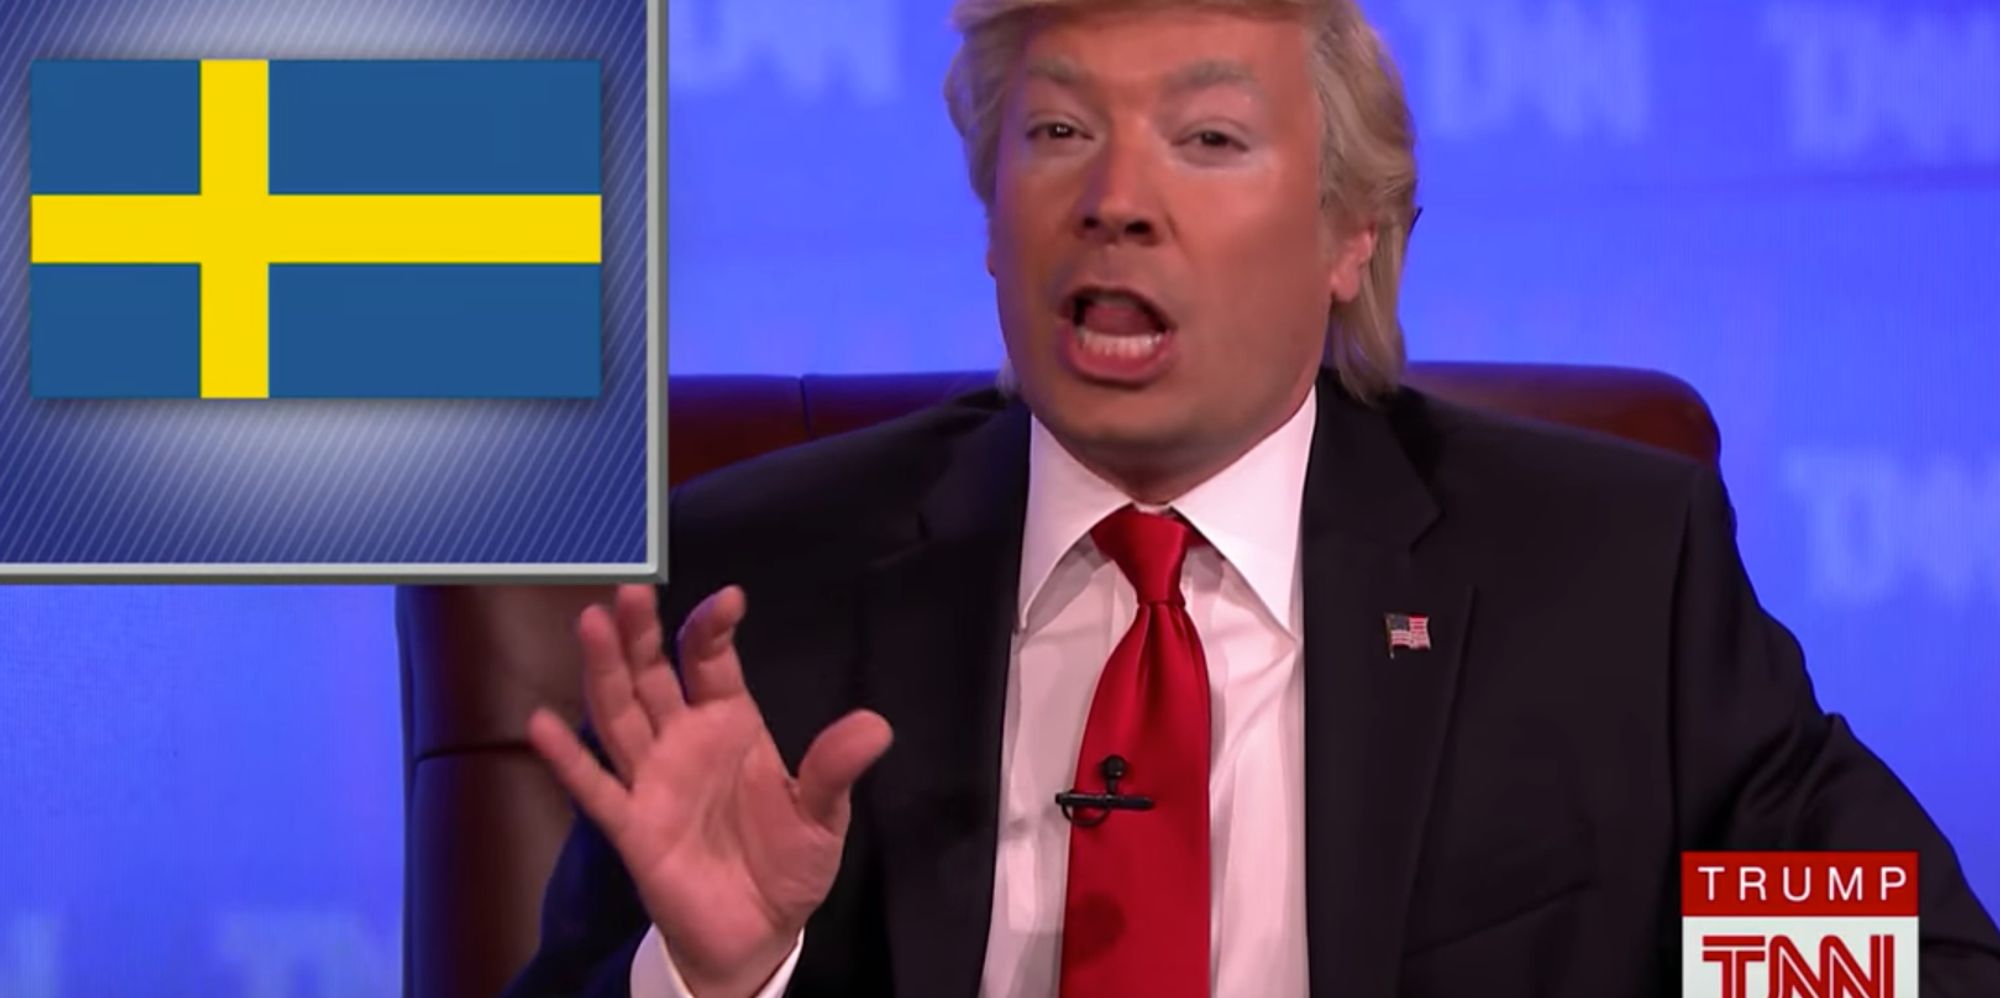 Jimmy Fallon Imagines What A Donald Trump TV Network Would Be Like - Huffington Post